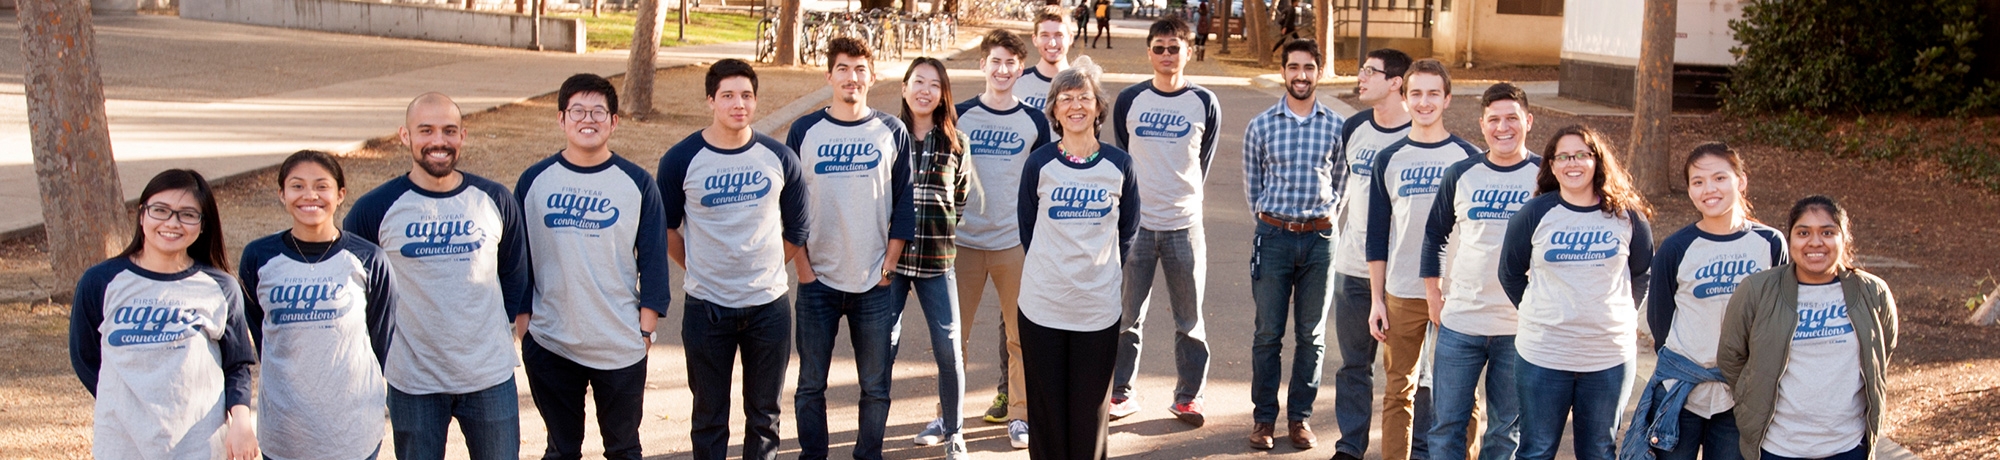 faculty and students posing in branded t-shirts